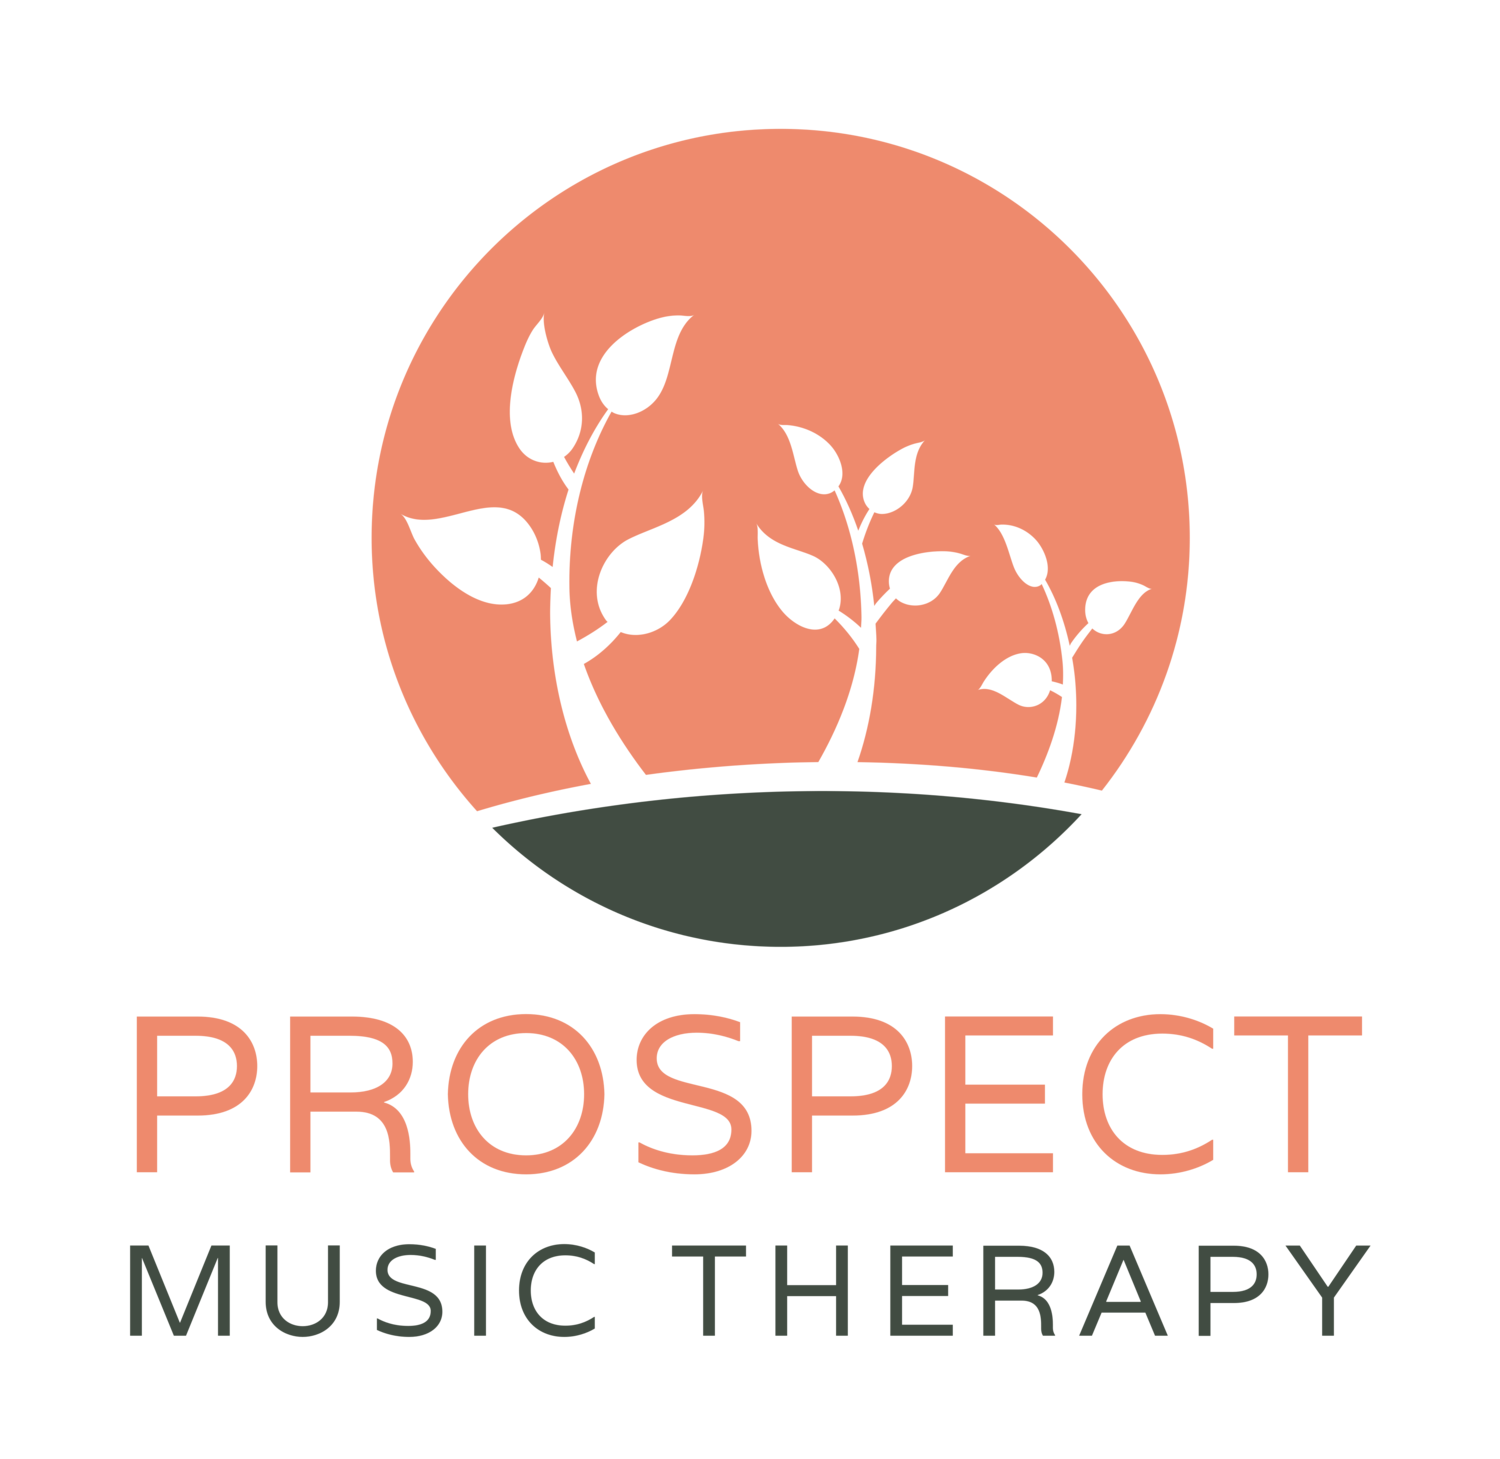 PROSPECT MUSIC THERAPY